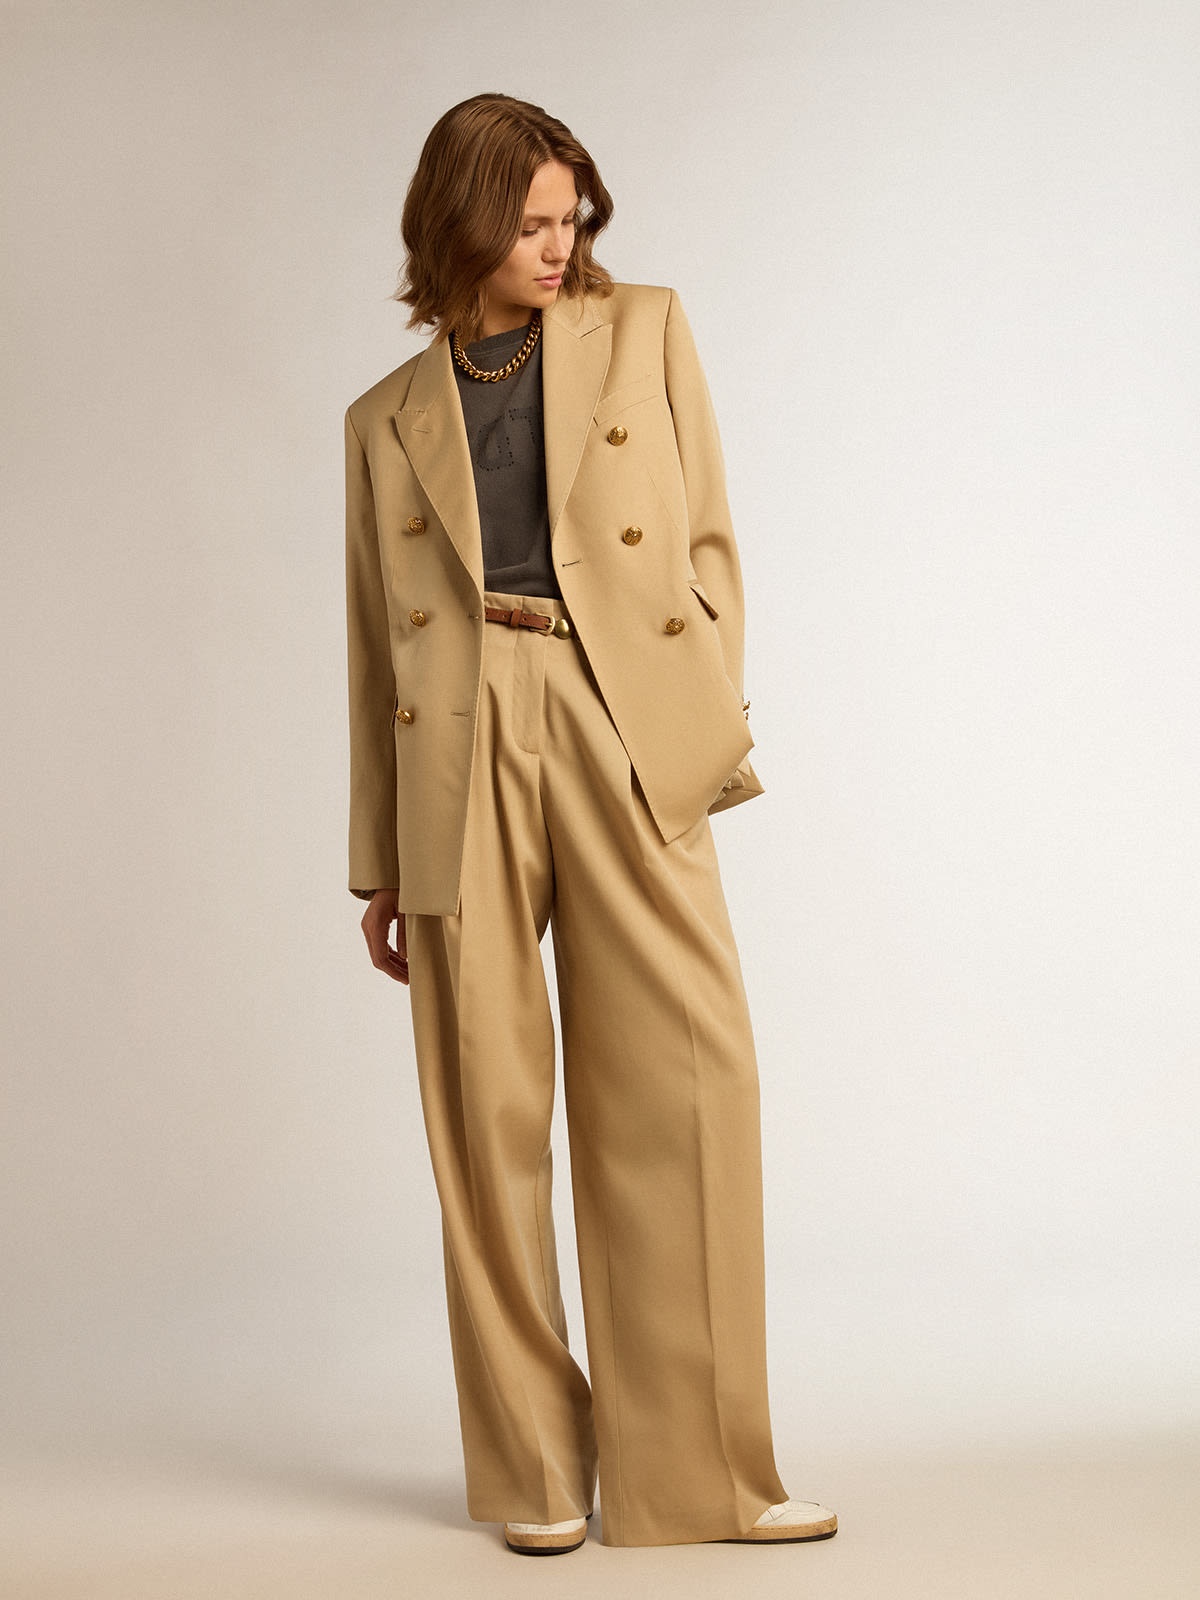 Beech-colored pants in wool and viscose blend